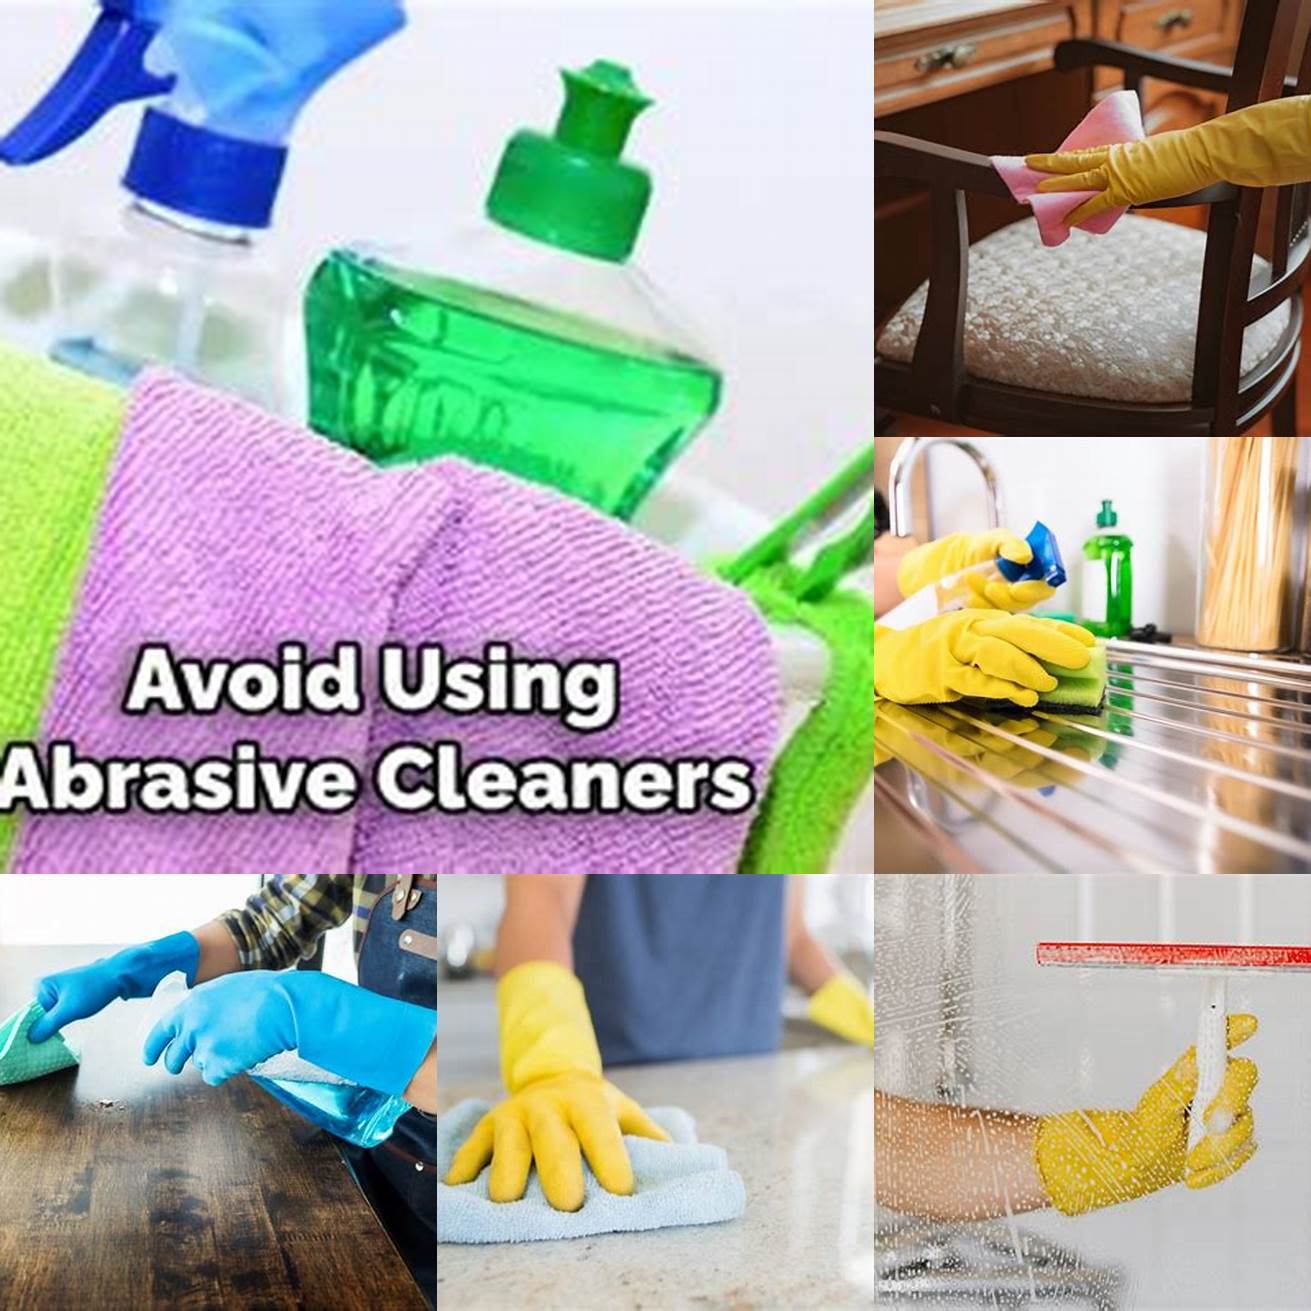 Avoid abrasive cleaners